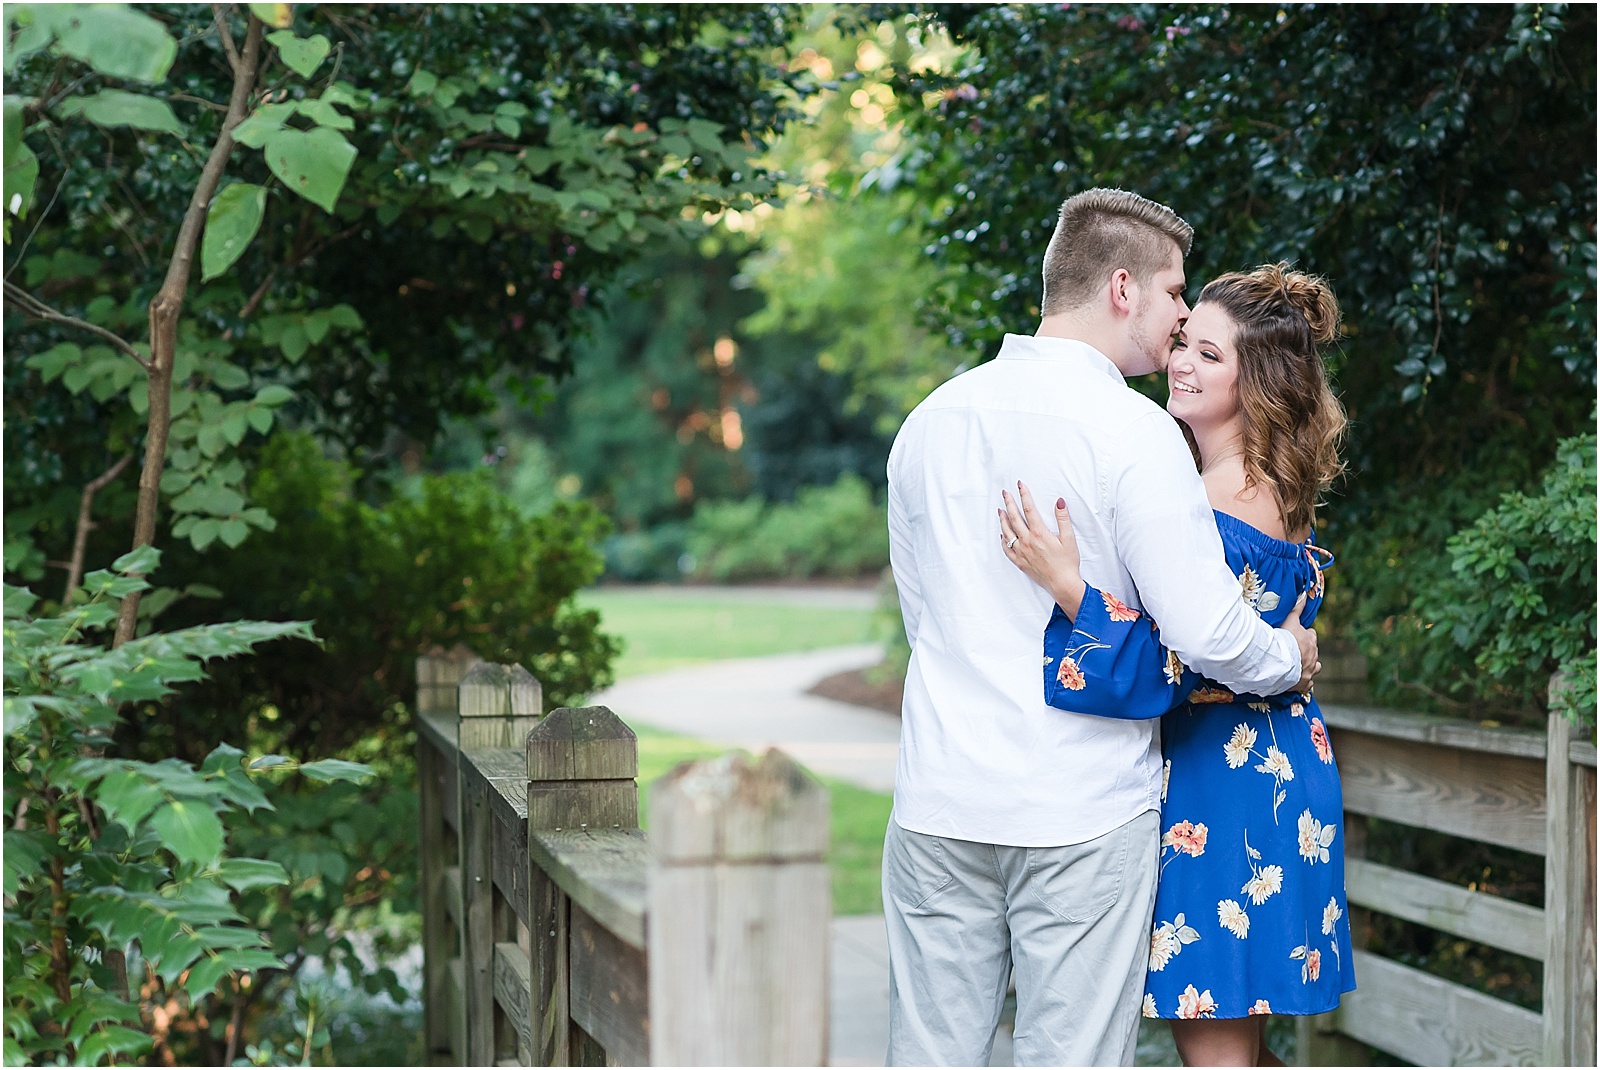 michelle and sara photography, greensboro arboretum engagement session, floral dress, white shirt, grey pants, arboetum engagement session